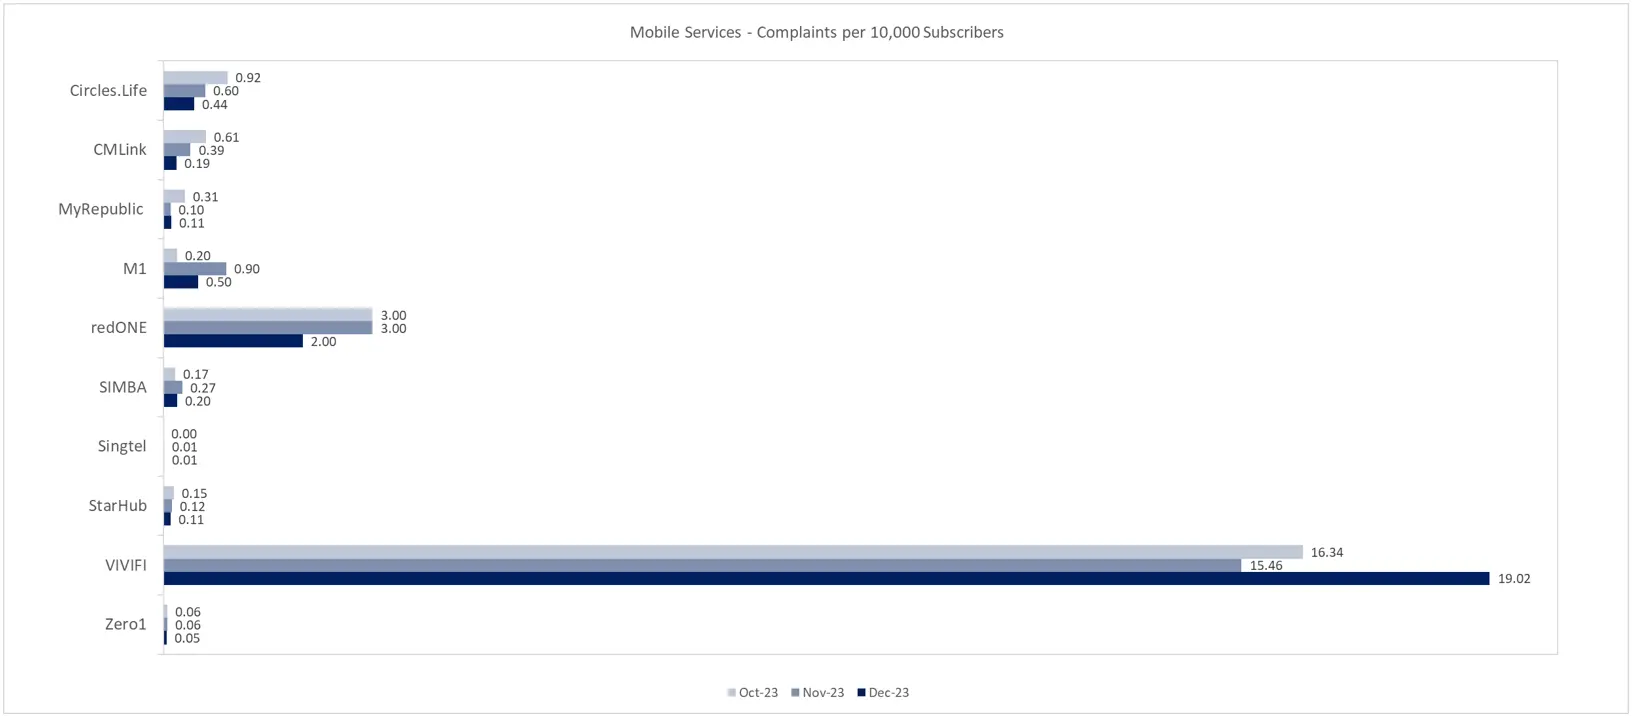 Mobile Services Complaints per 10000 Subscribers